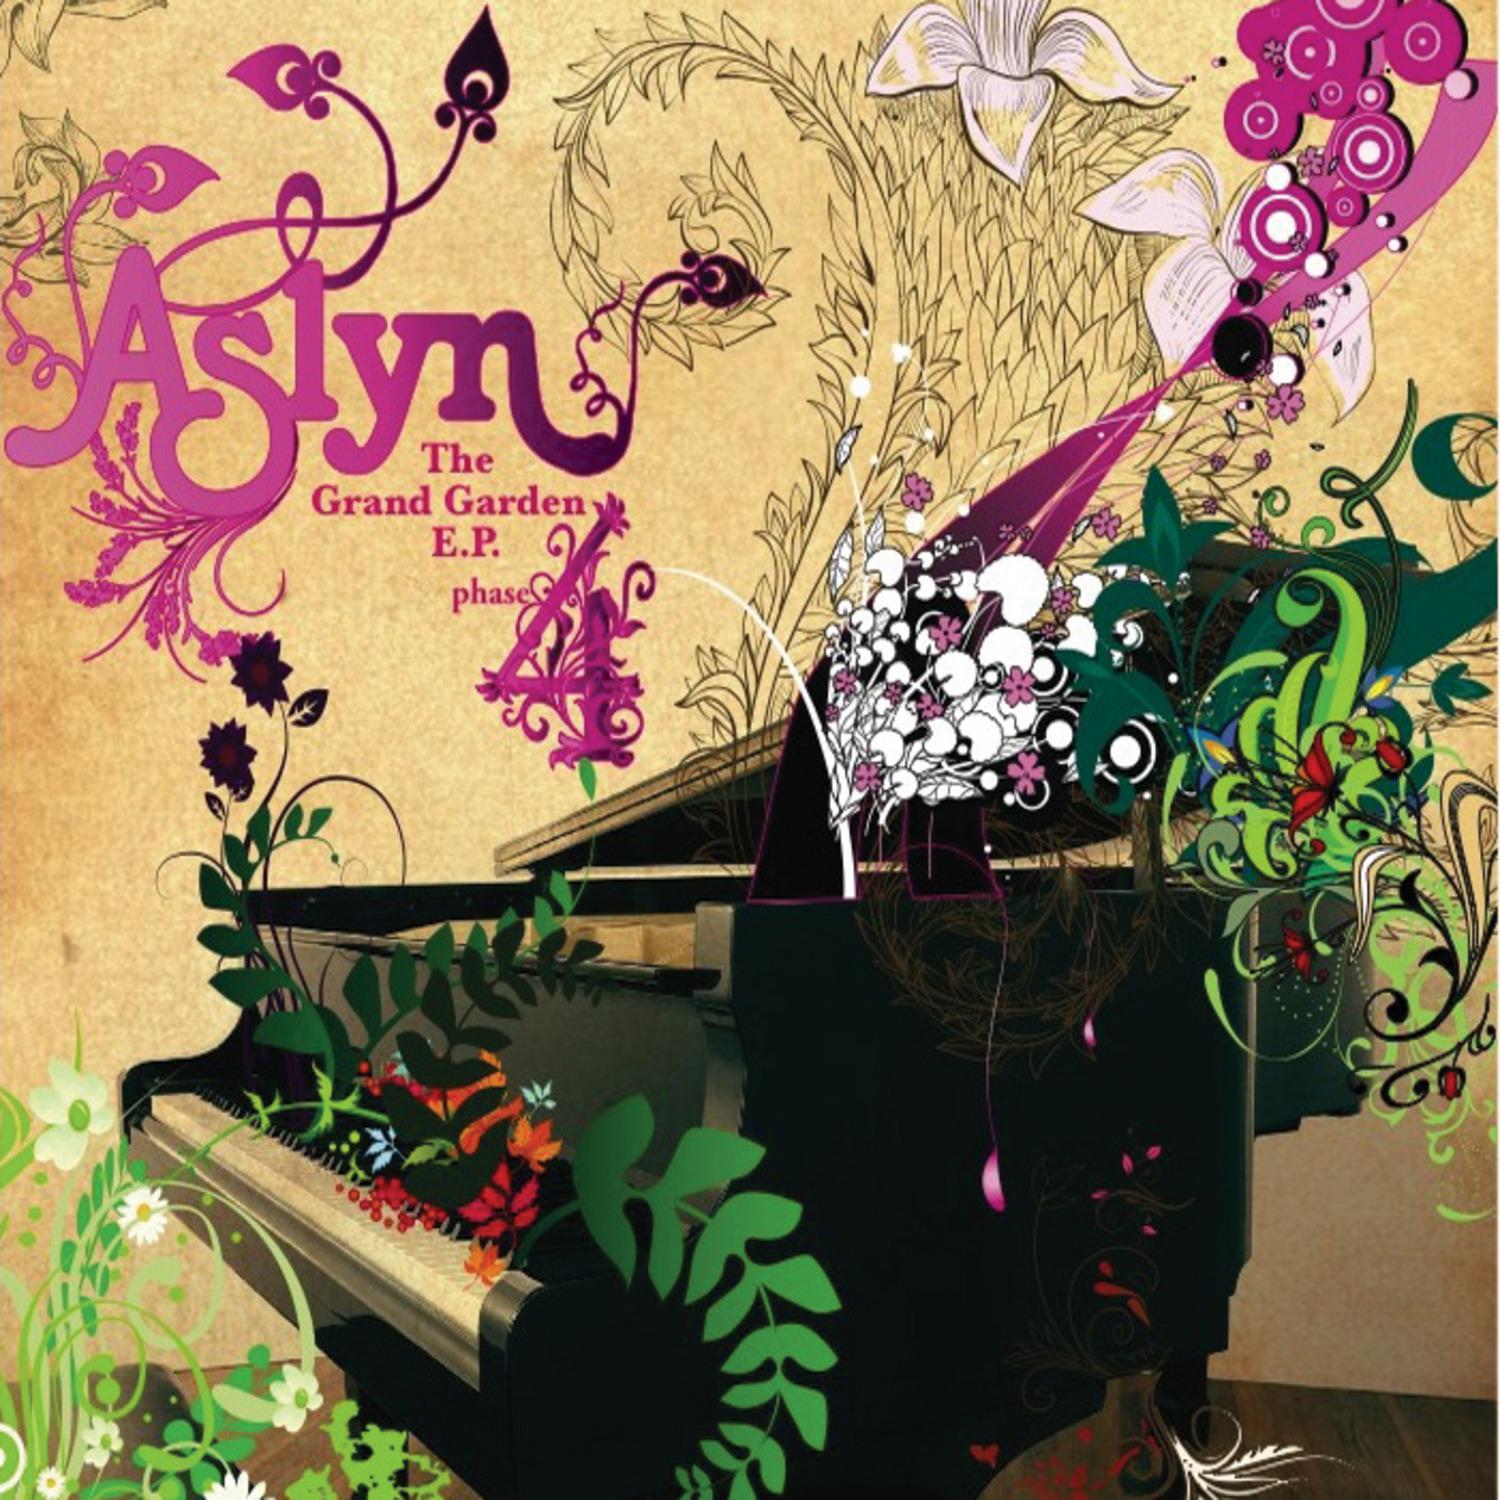 Aslyn - That's When I Love You